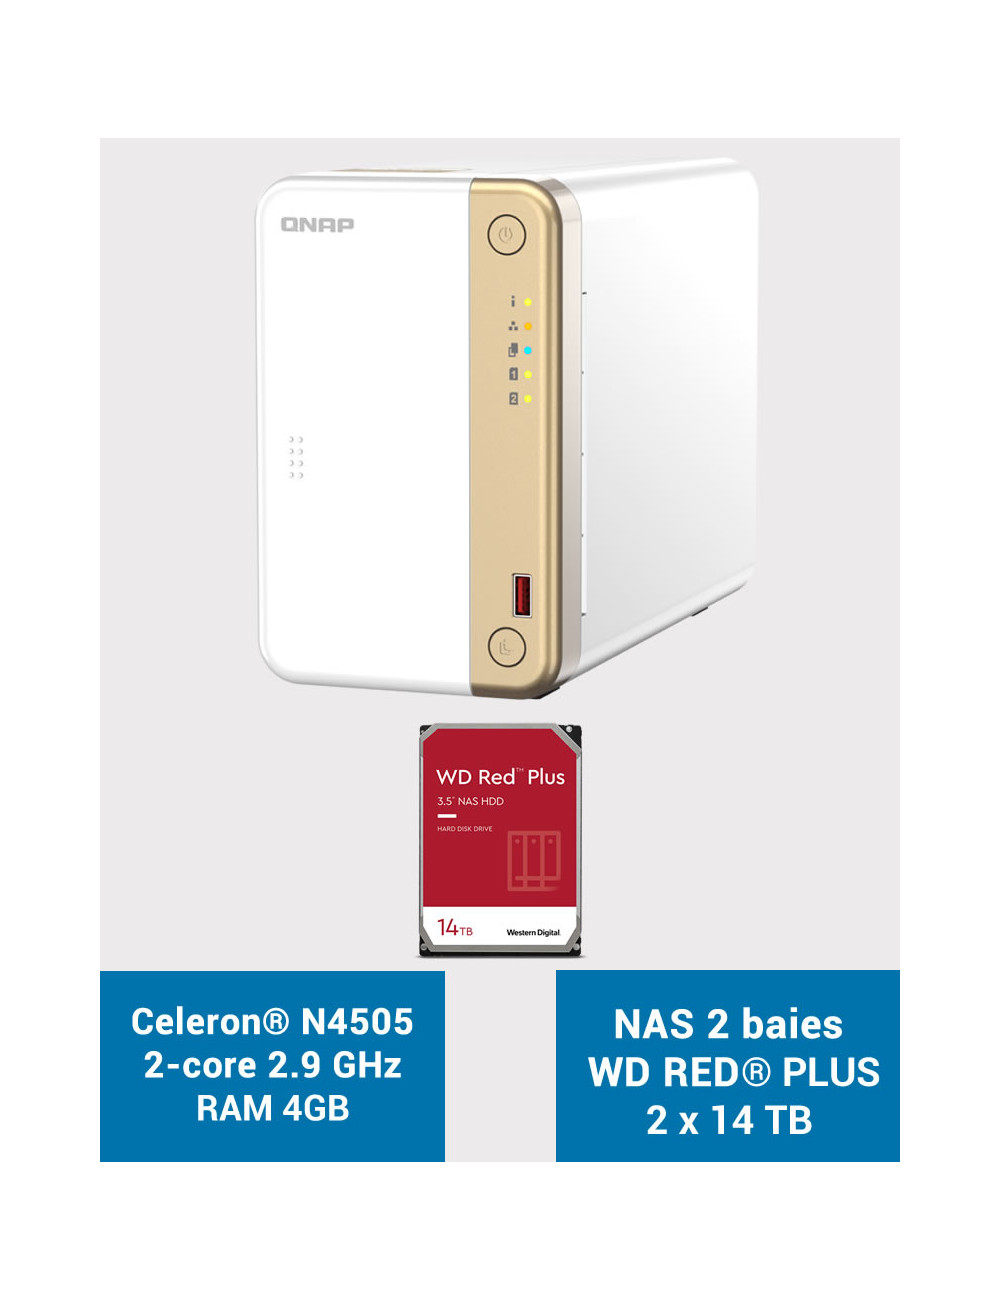 QNAP TS-262 4GB Serveur NAS WD RED PLUS 28To (2x14To)